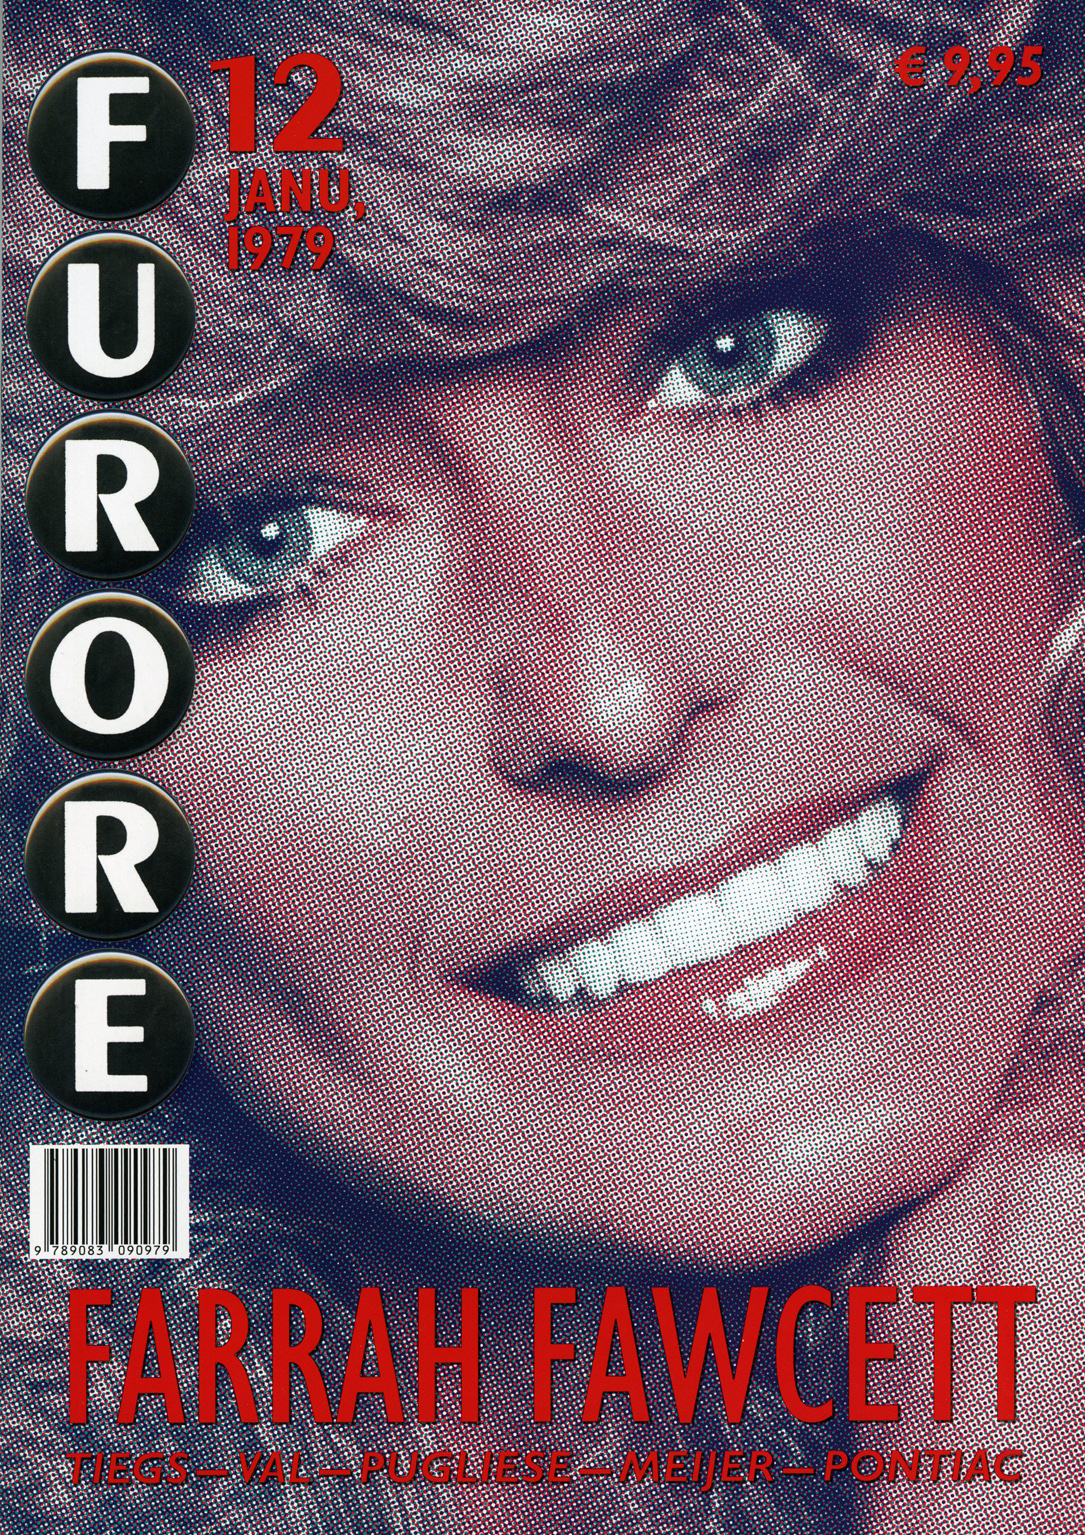 Furore #12 once again available!